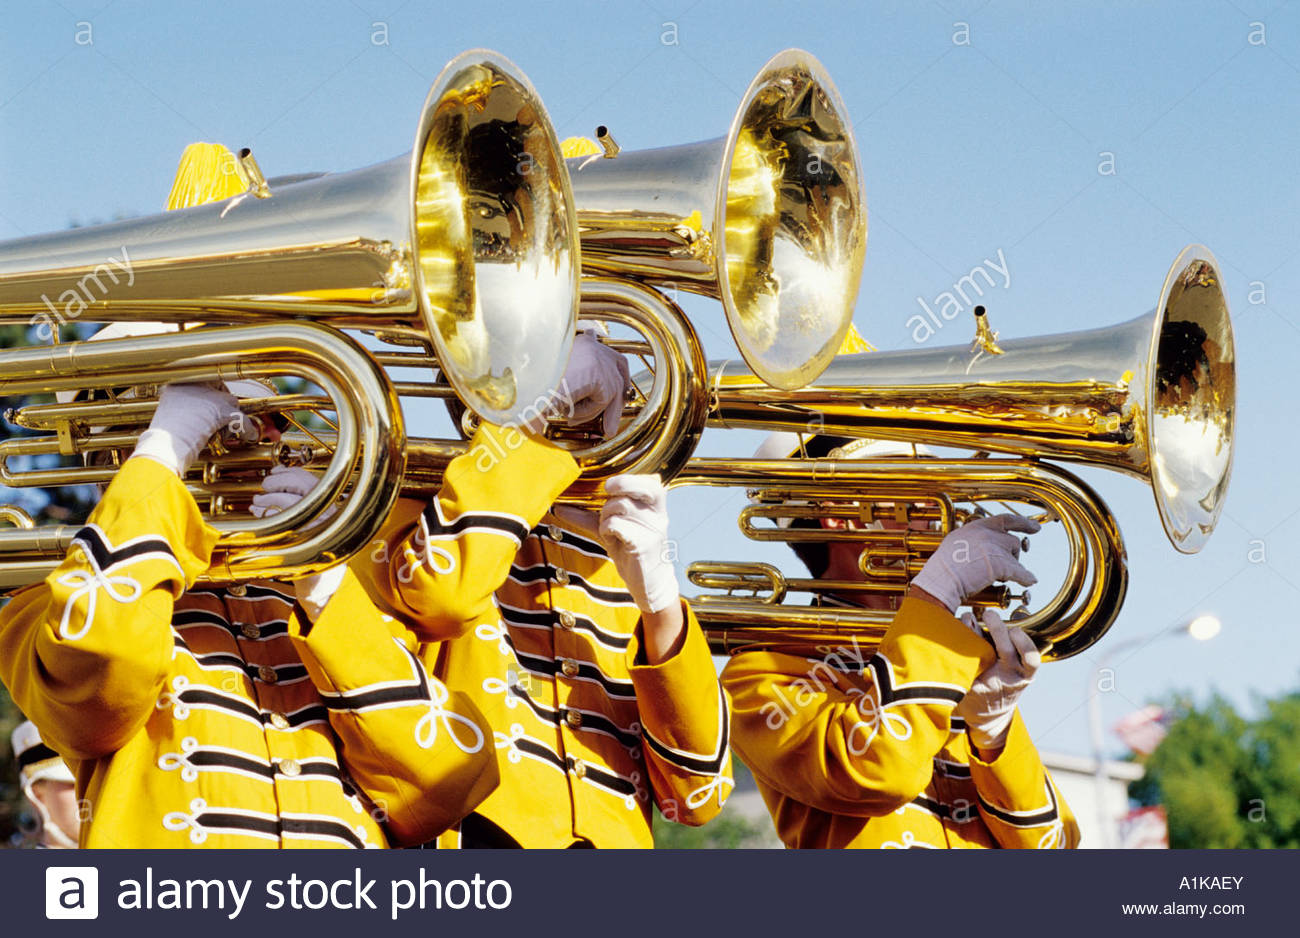 three-people-in-yellow-uniform-playing-trumpets-in-brass-band-A1KAEY.jpg